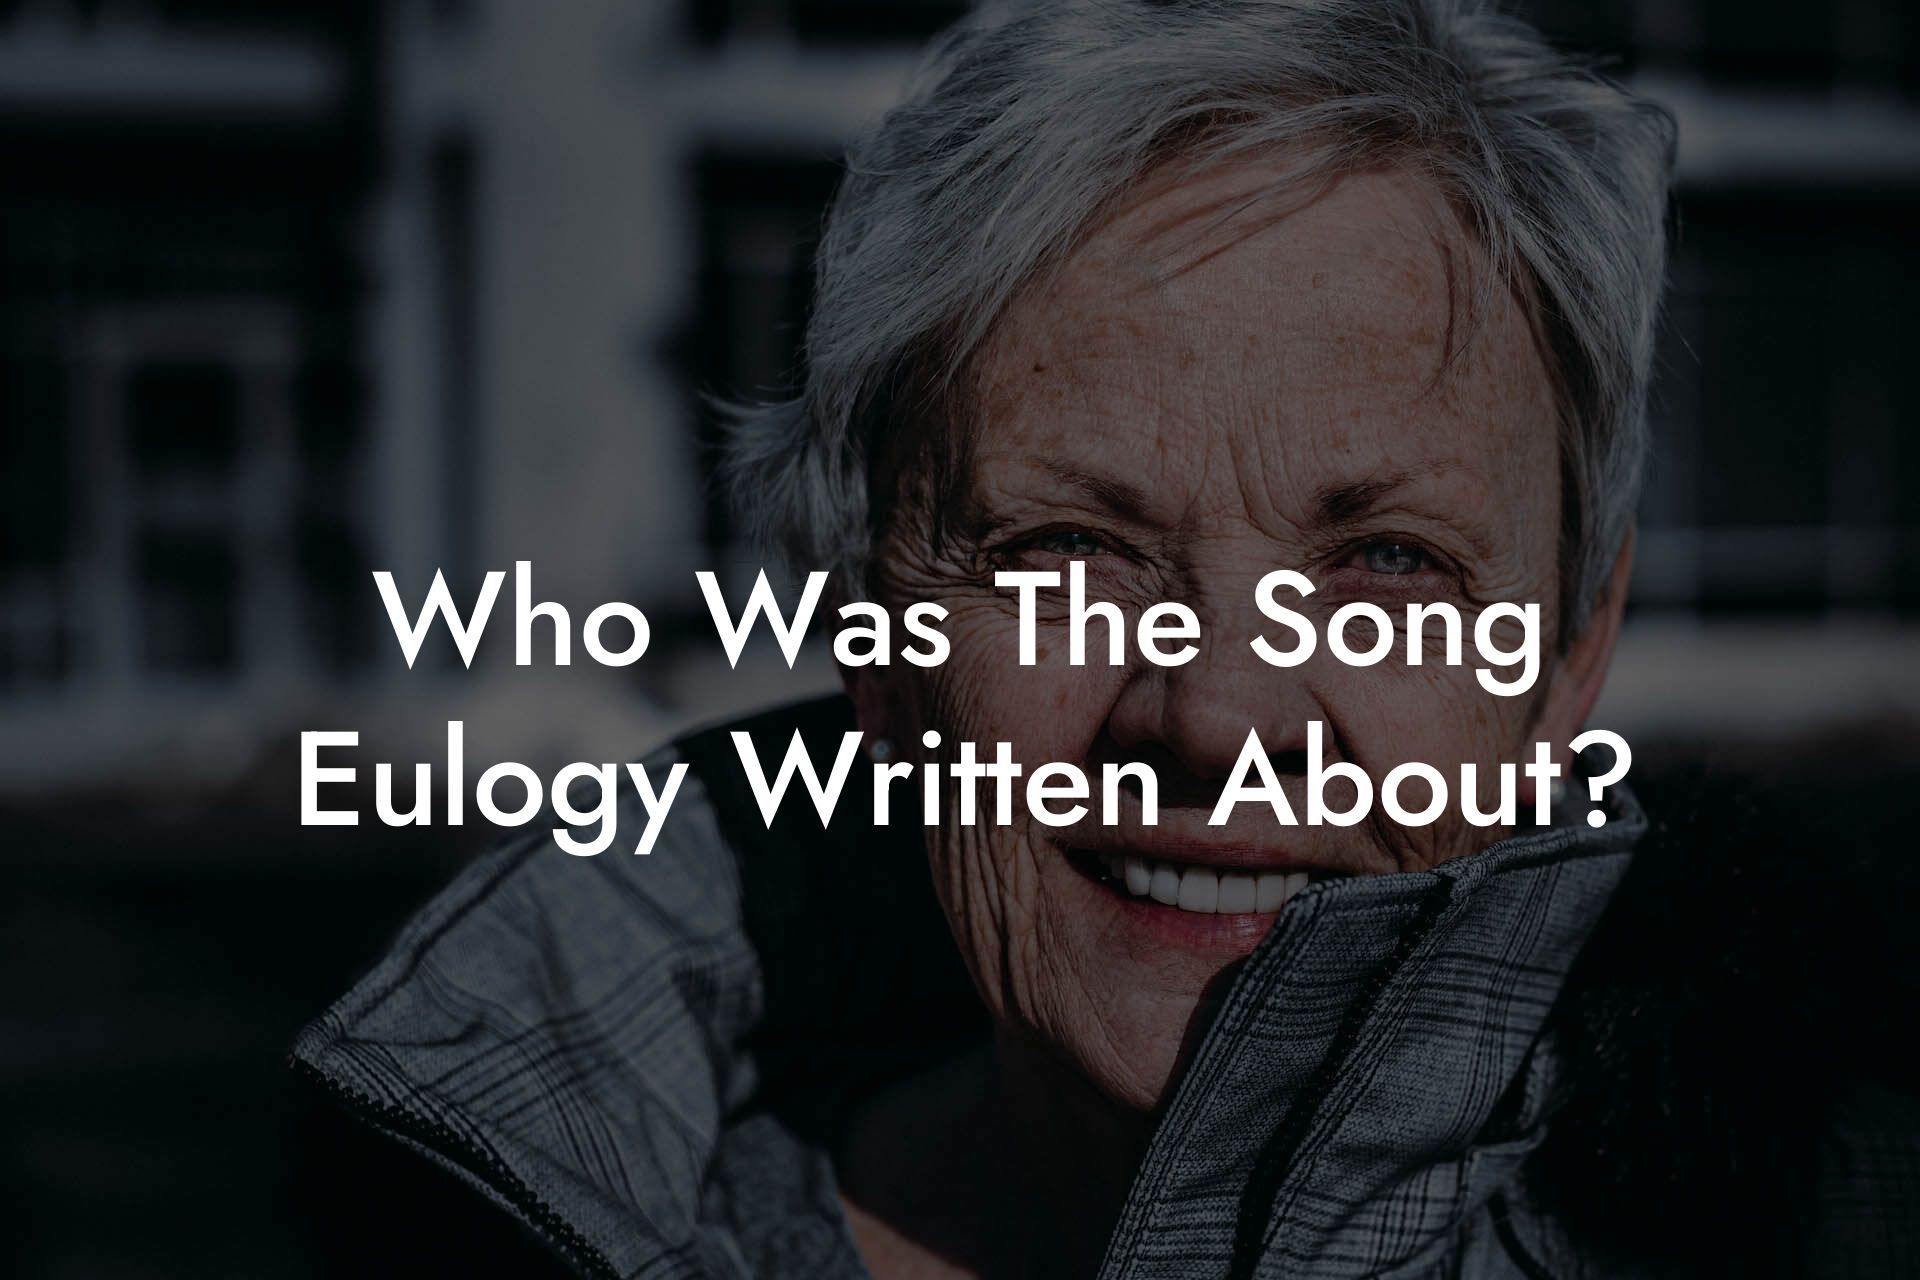 Who Was The Song Eulogy Written About?